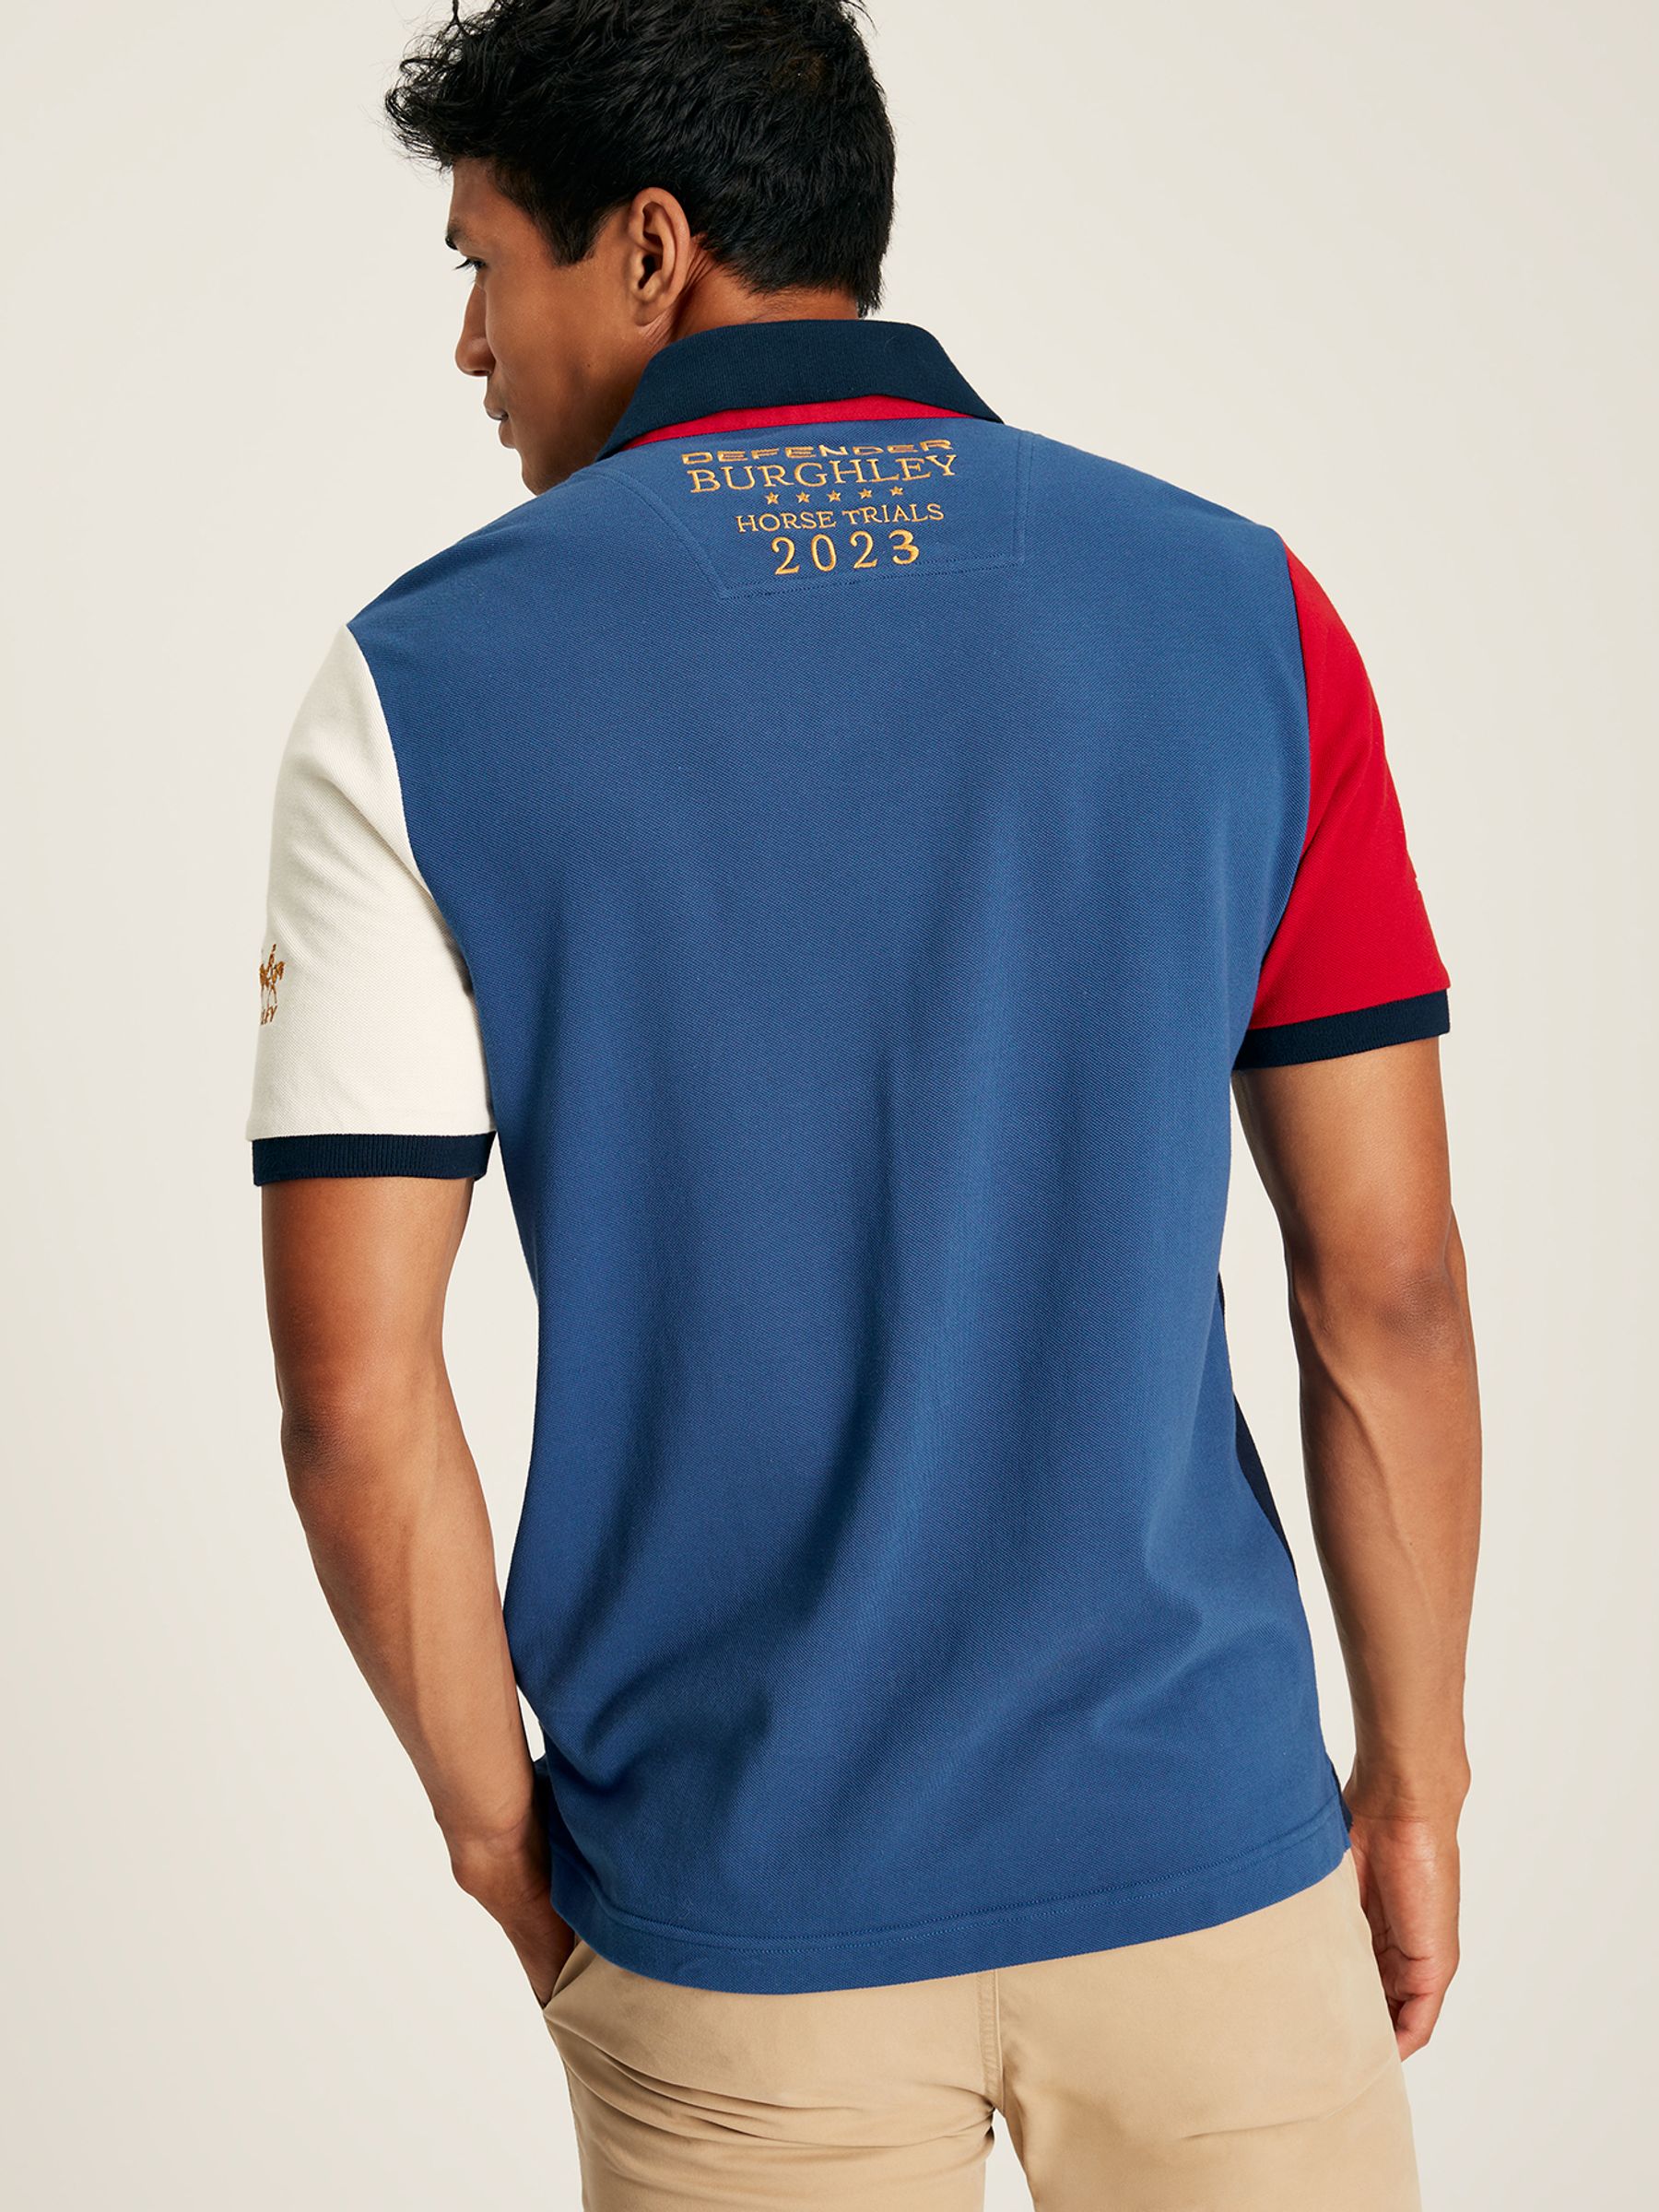 Buy Official Burghley Blue Polo Shirt from the Joules online shop